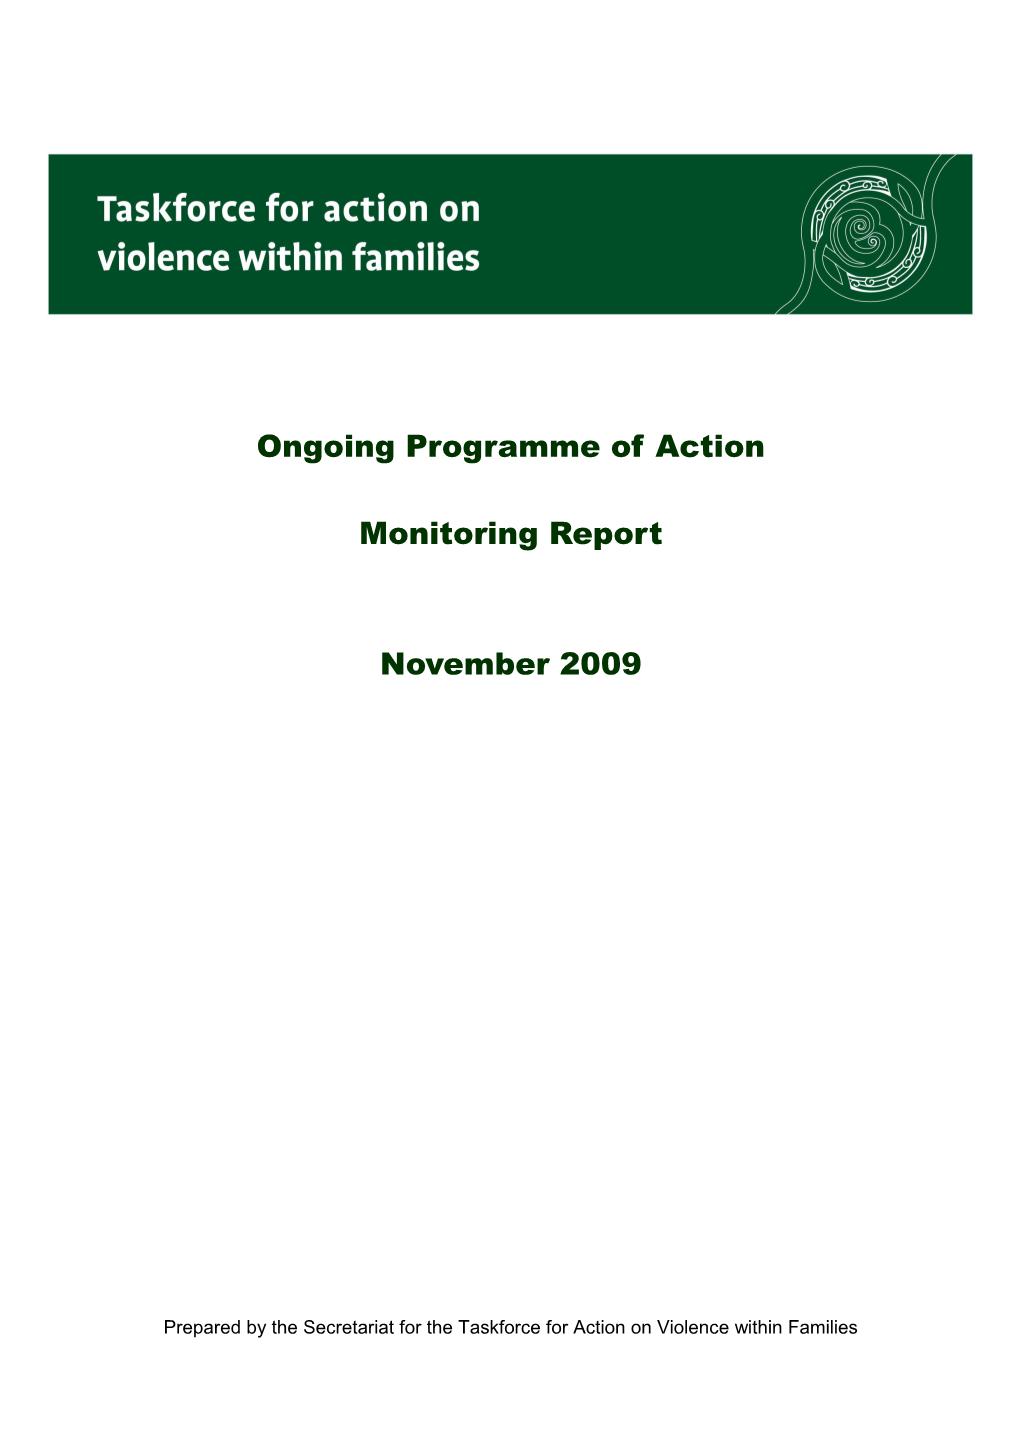 Ongoing Programme of Action s2